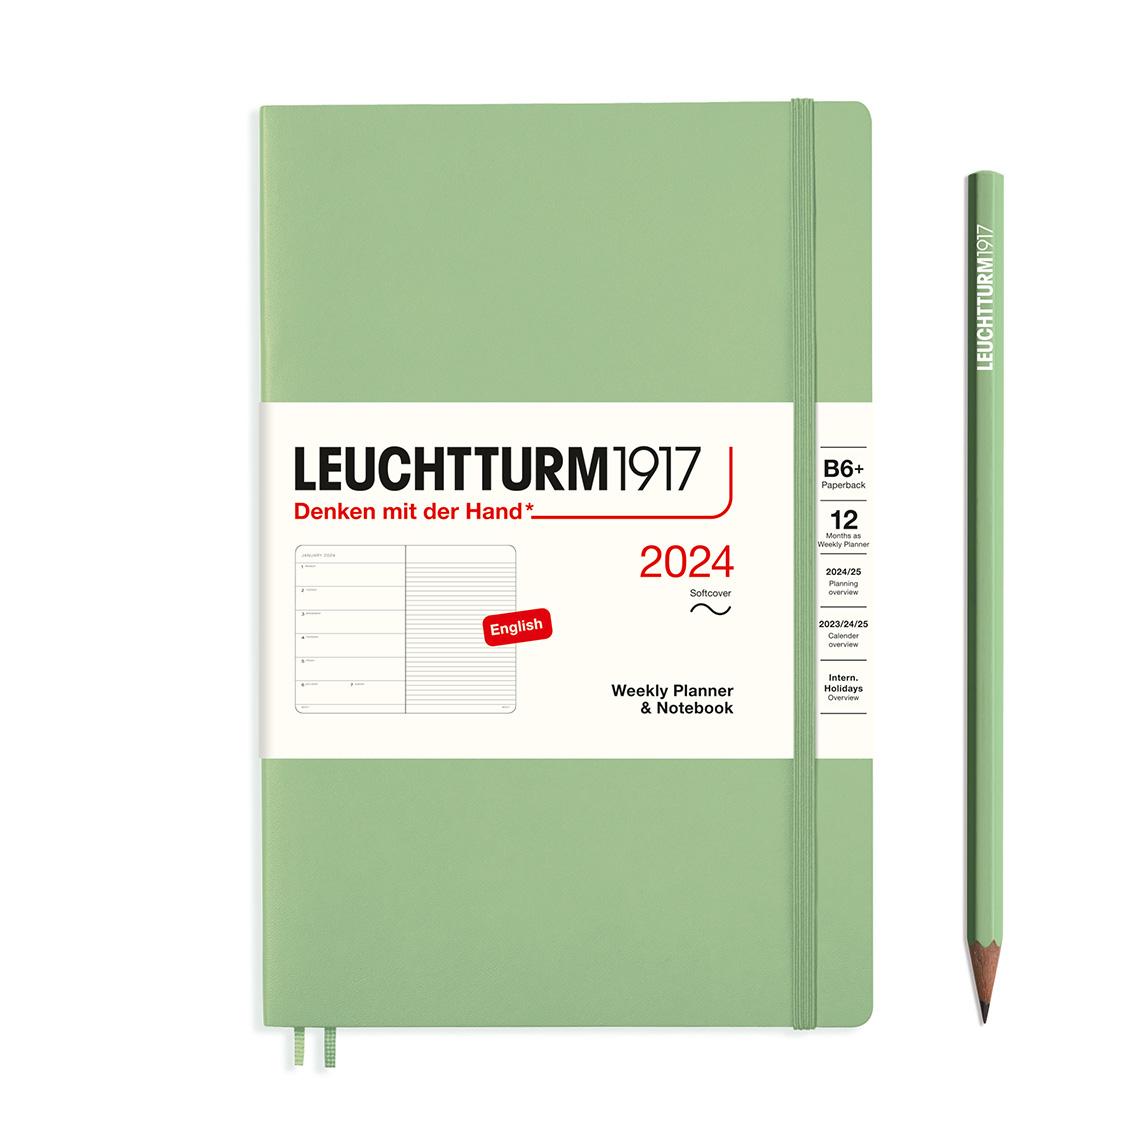 softcover weekly planner and notebook B6+ sage by Leuchtturm1917